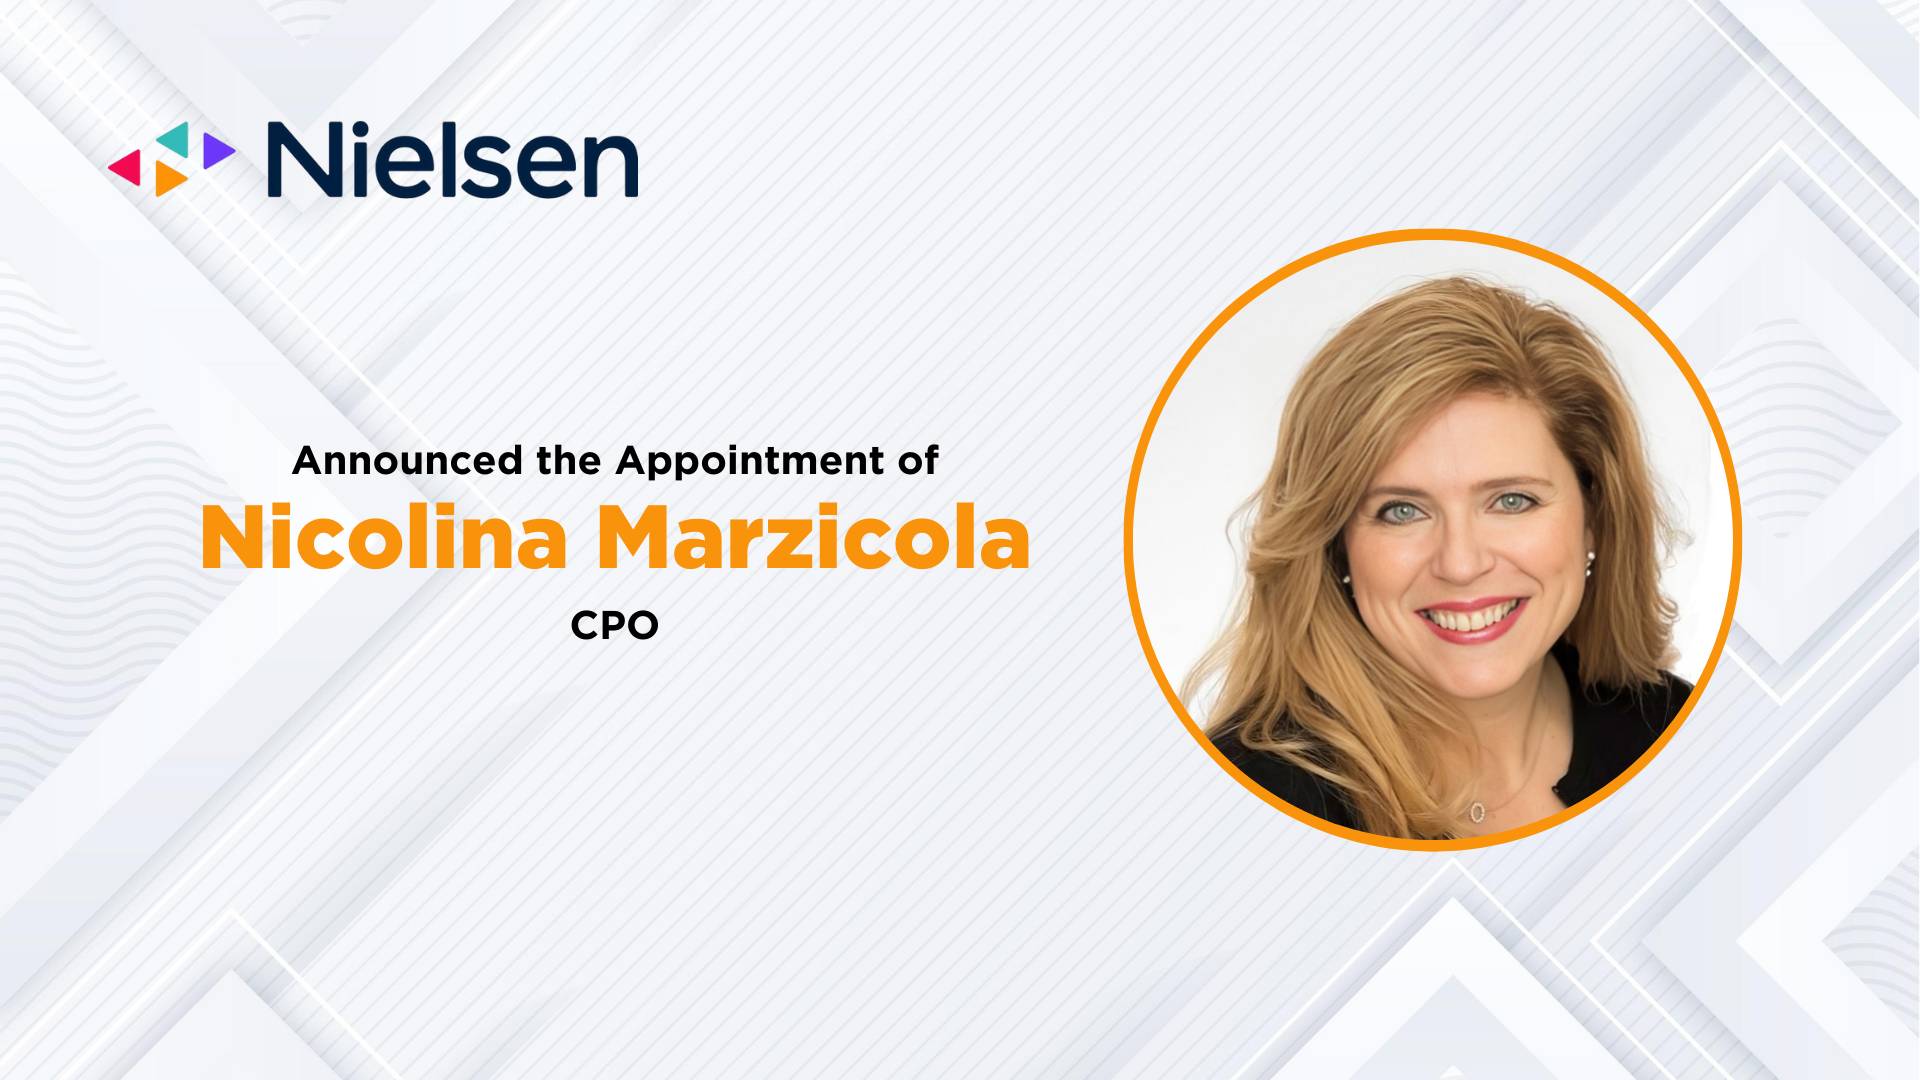 Nicolina Marzicola Named Chief People Officer of Nielsen